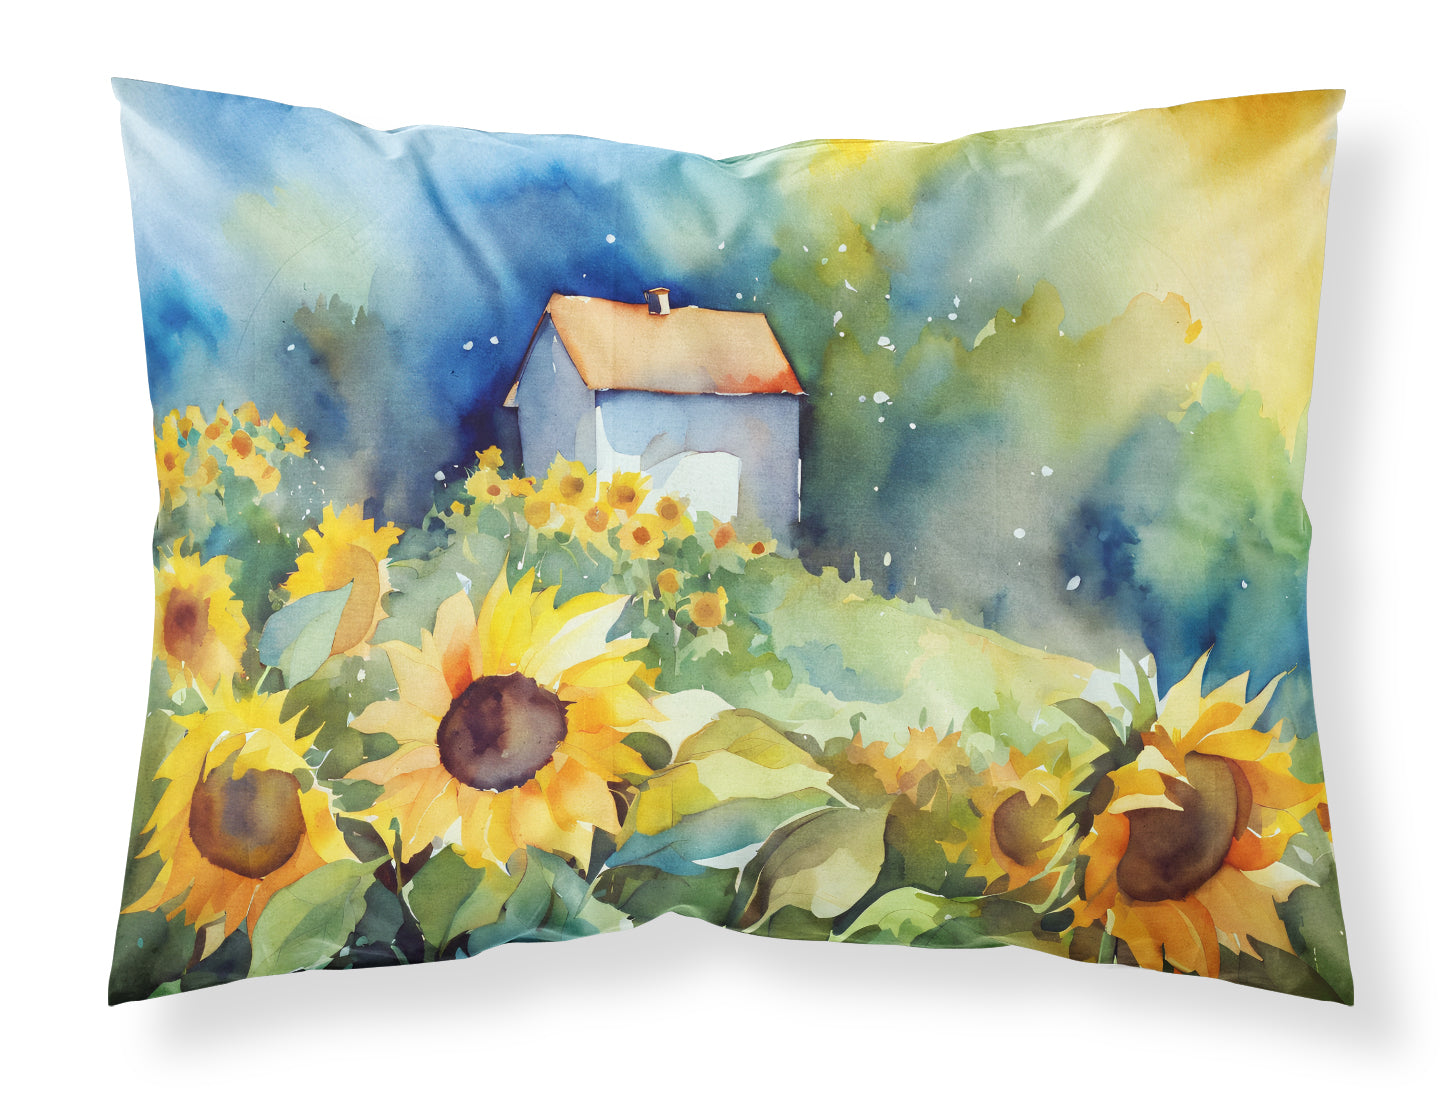 Buy this Sunflowers in Watercolor Fabric Standard Pillowcase